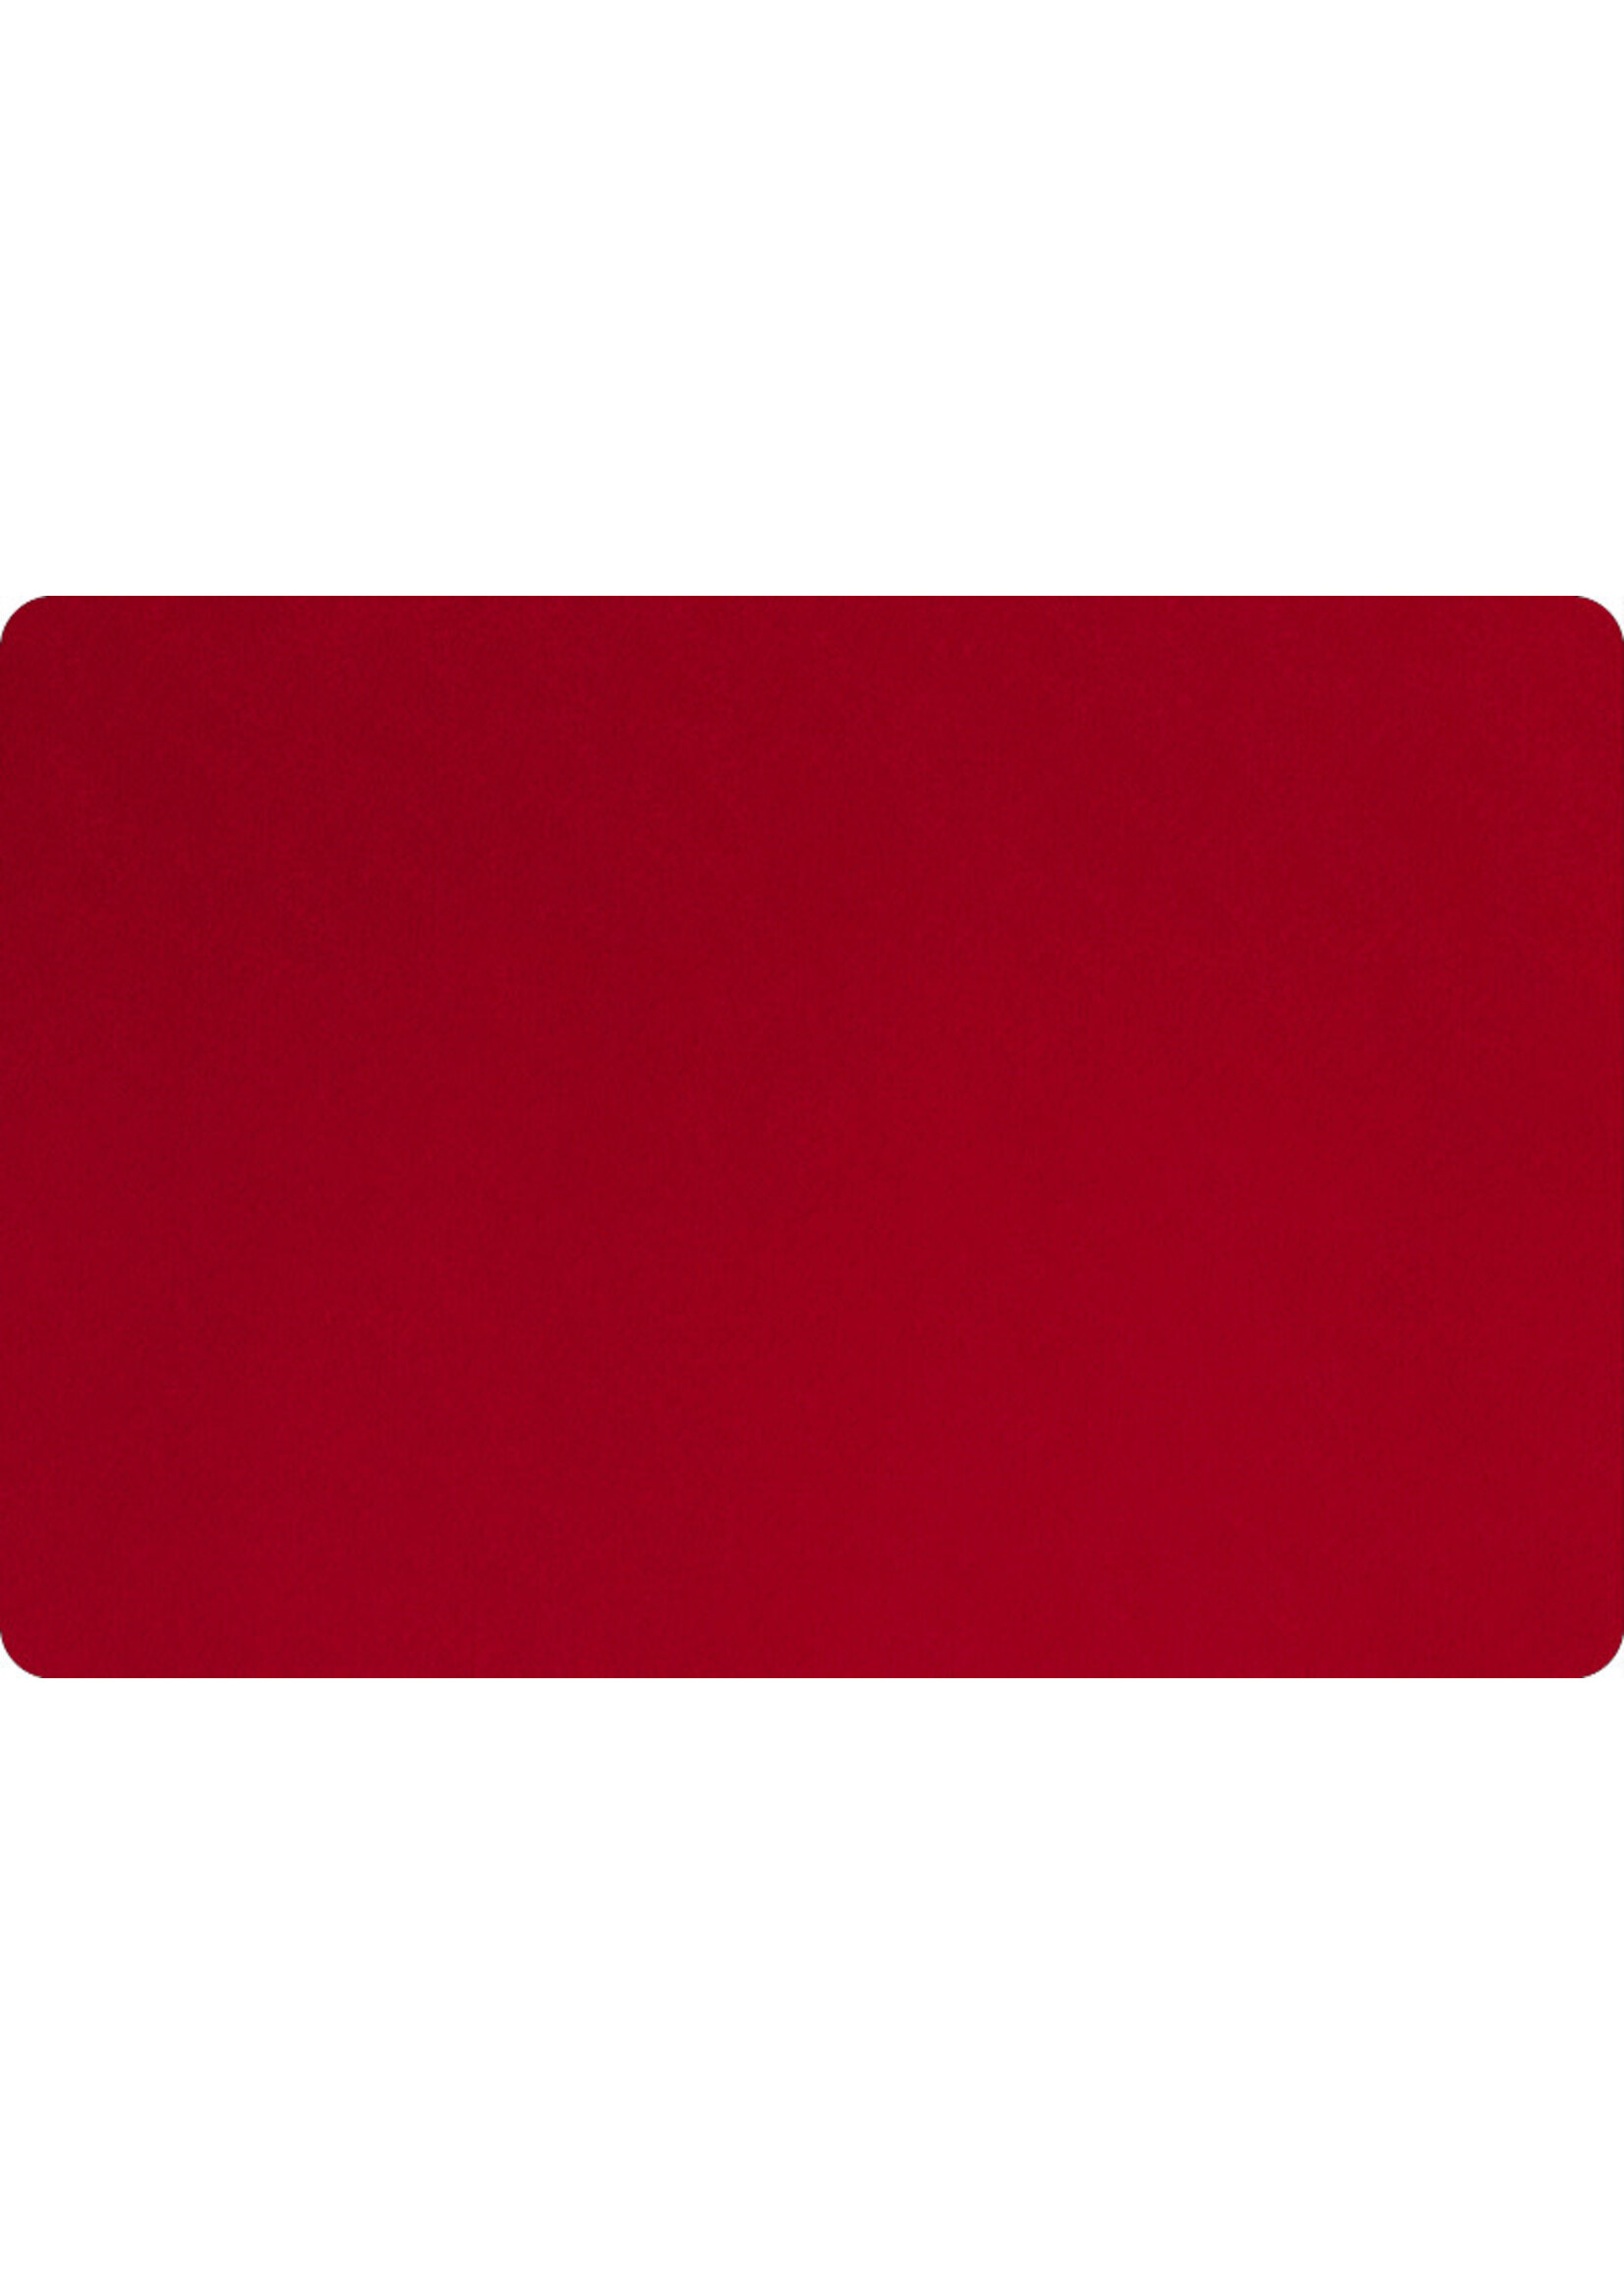 Shannon Fabrics Minky, Extra Wide Solid Cuddle3, 90" Cardinal, (by the inch)